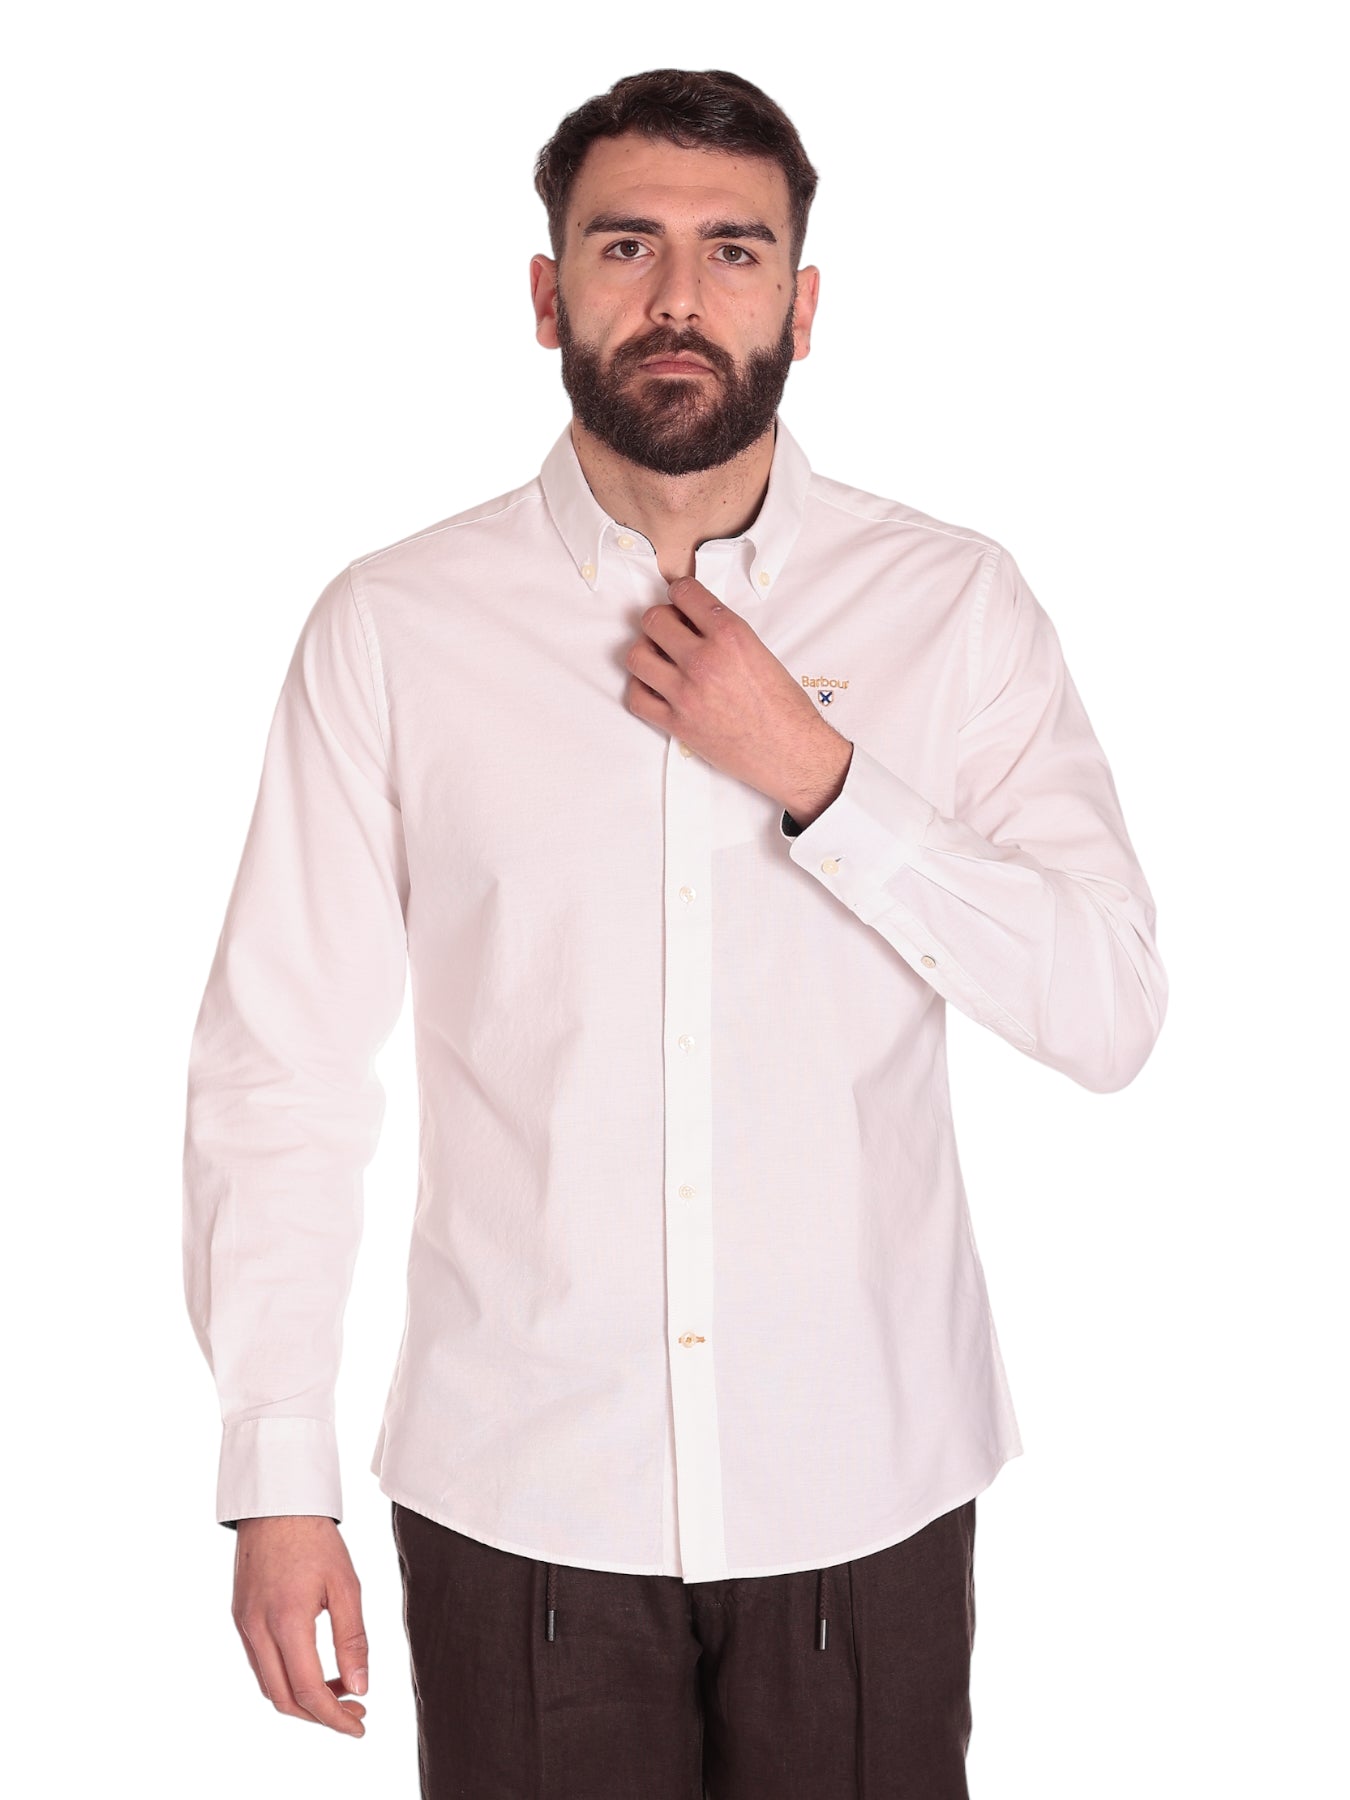 Barbour Shirt Msh5170 White